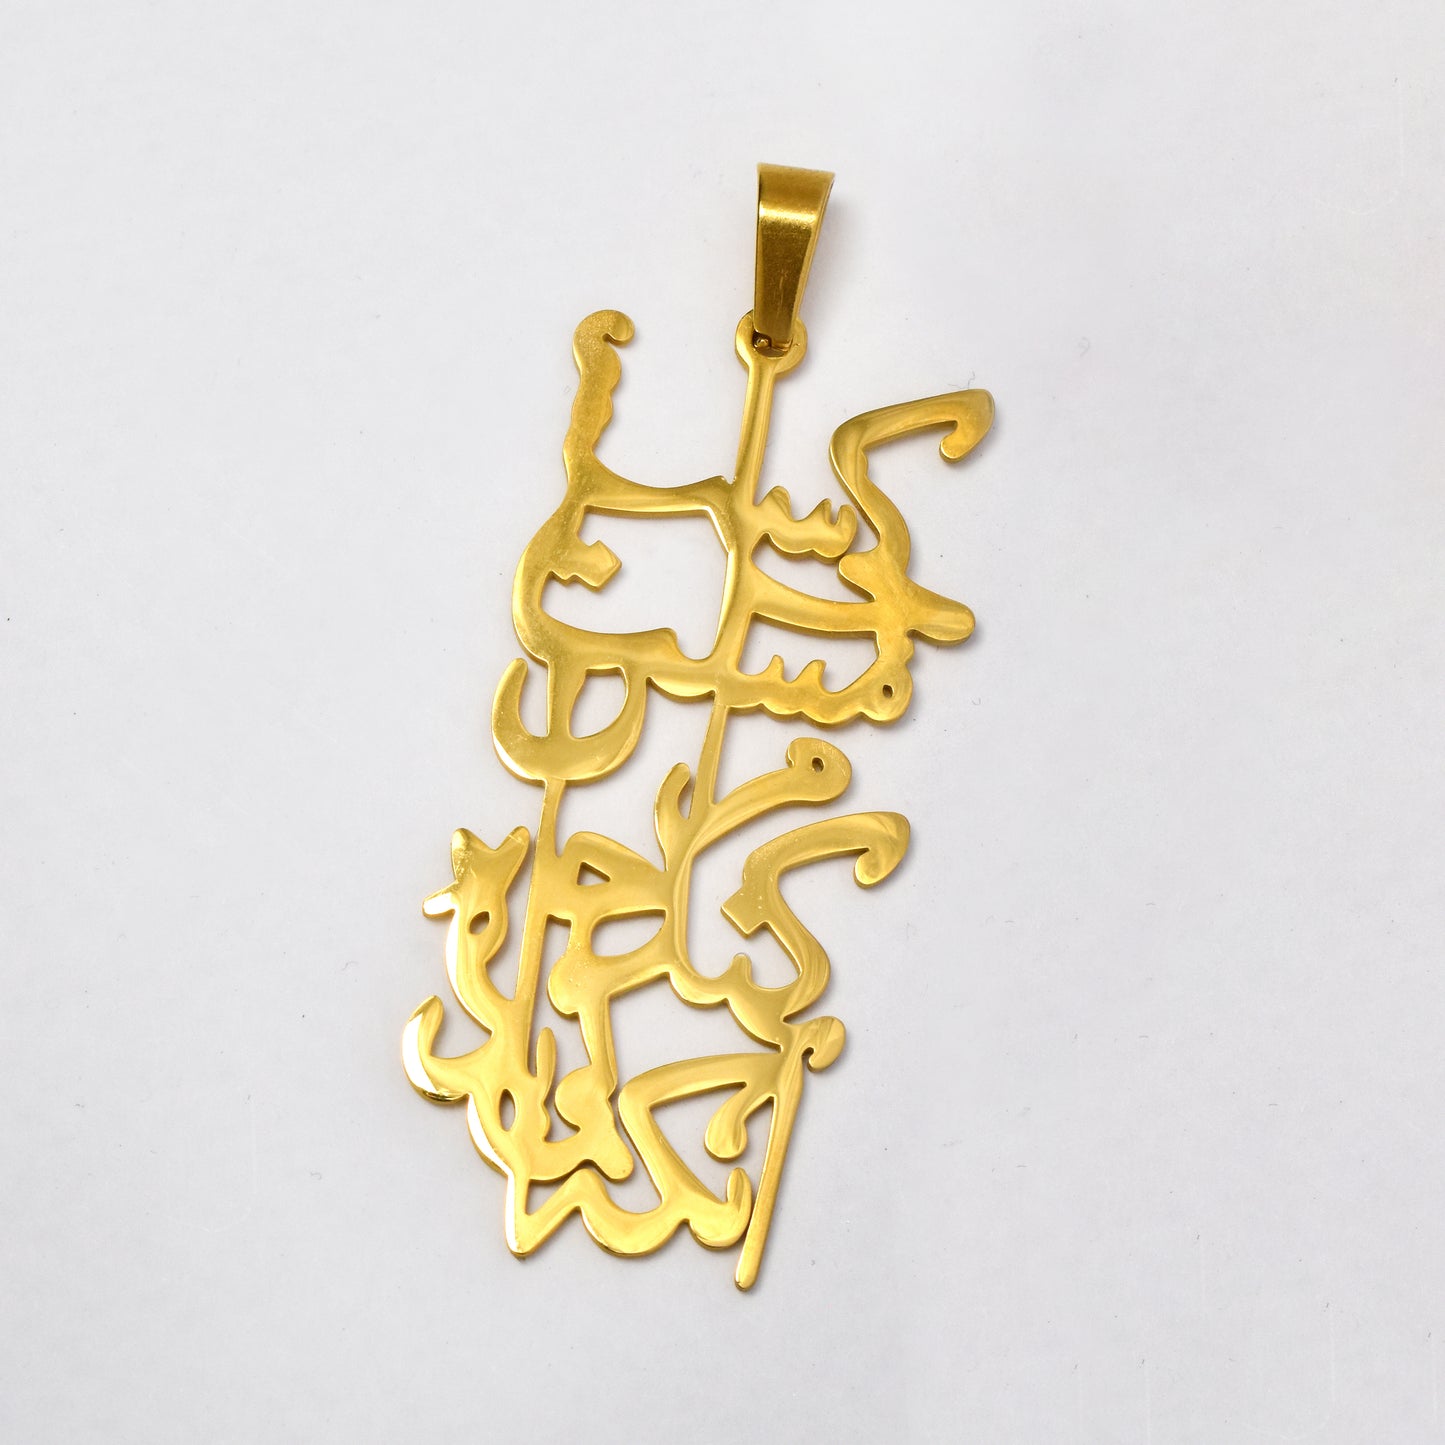 Stainless steel gold plating Arabic text pendant